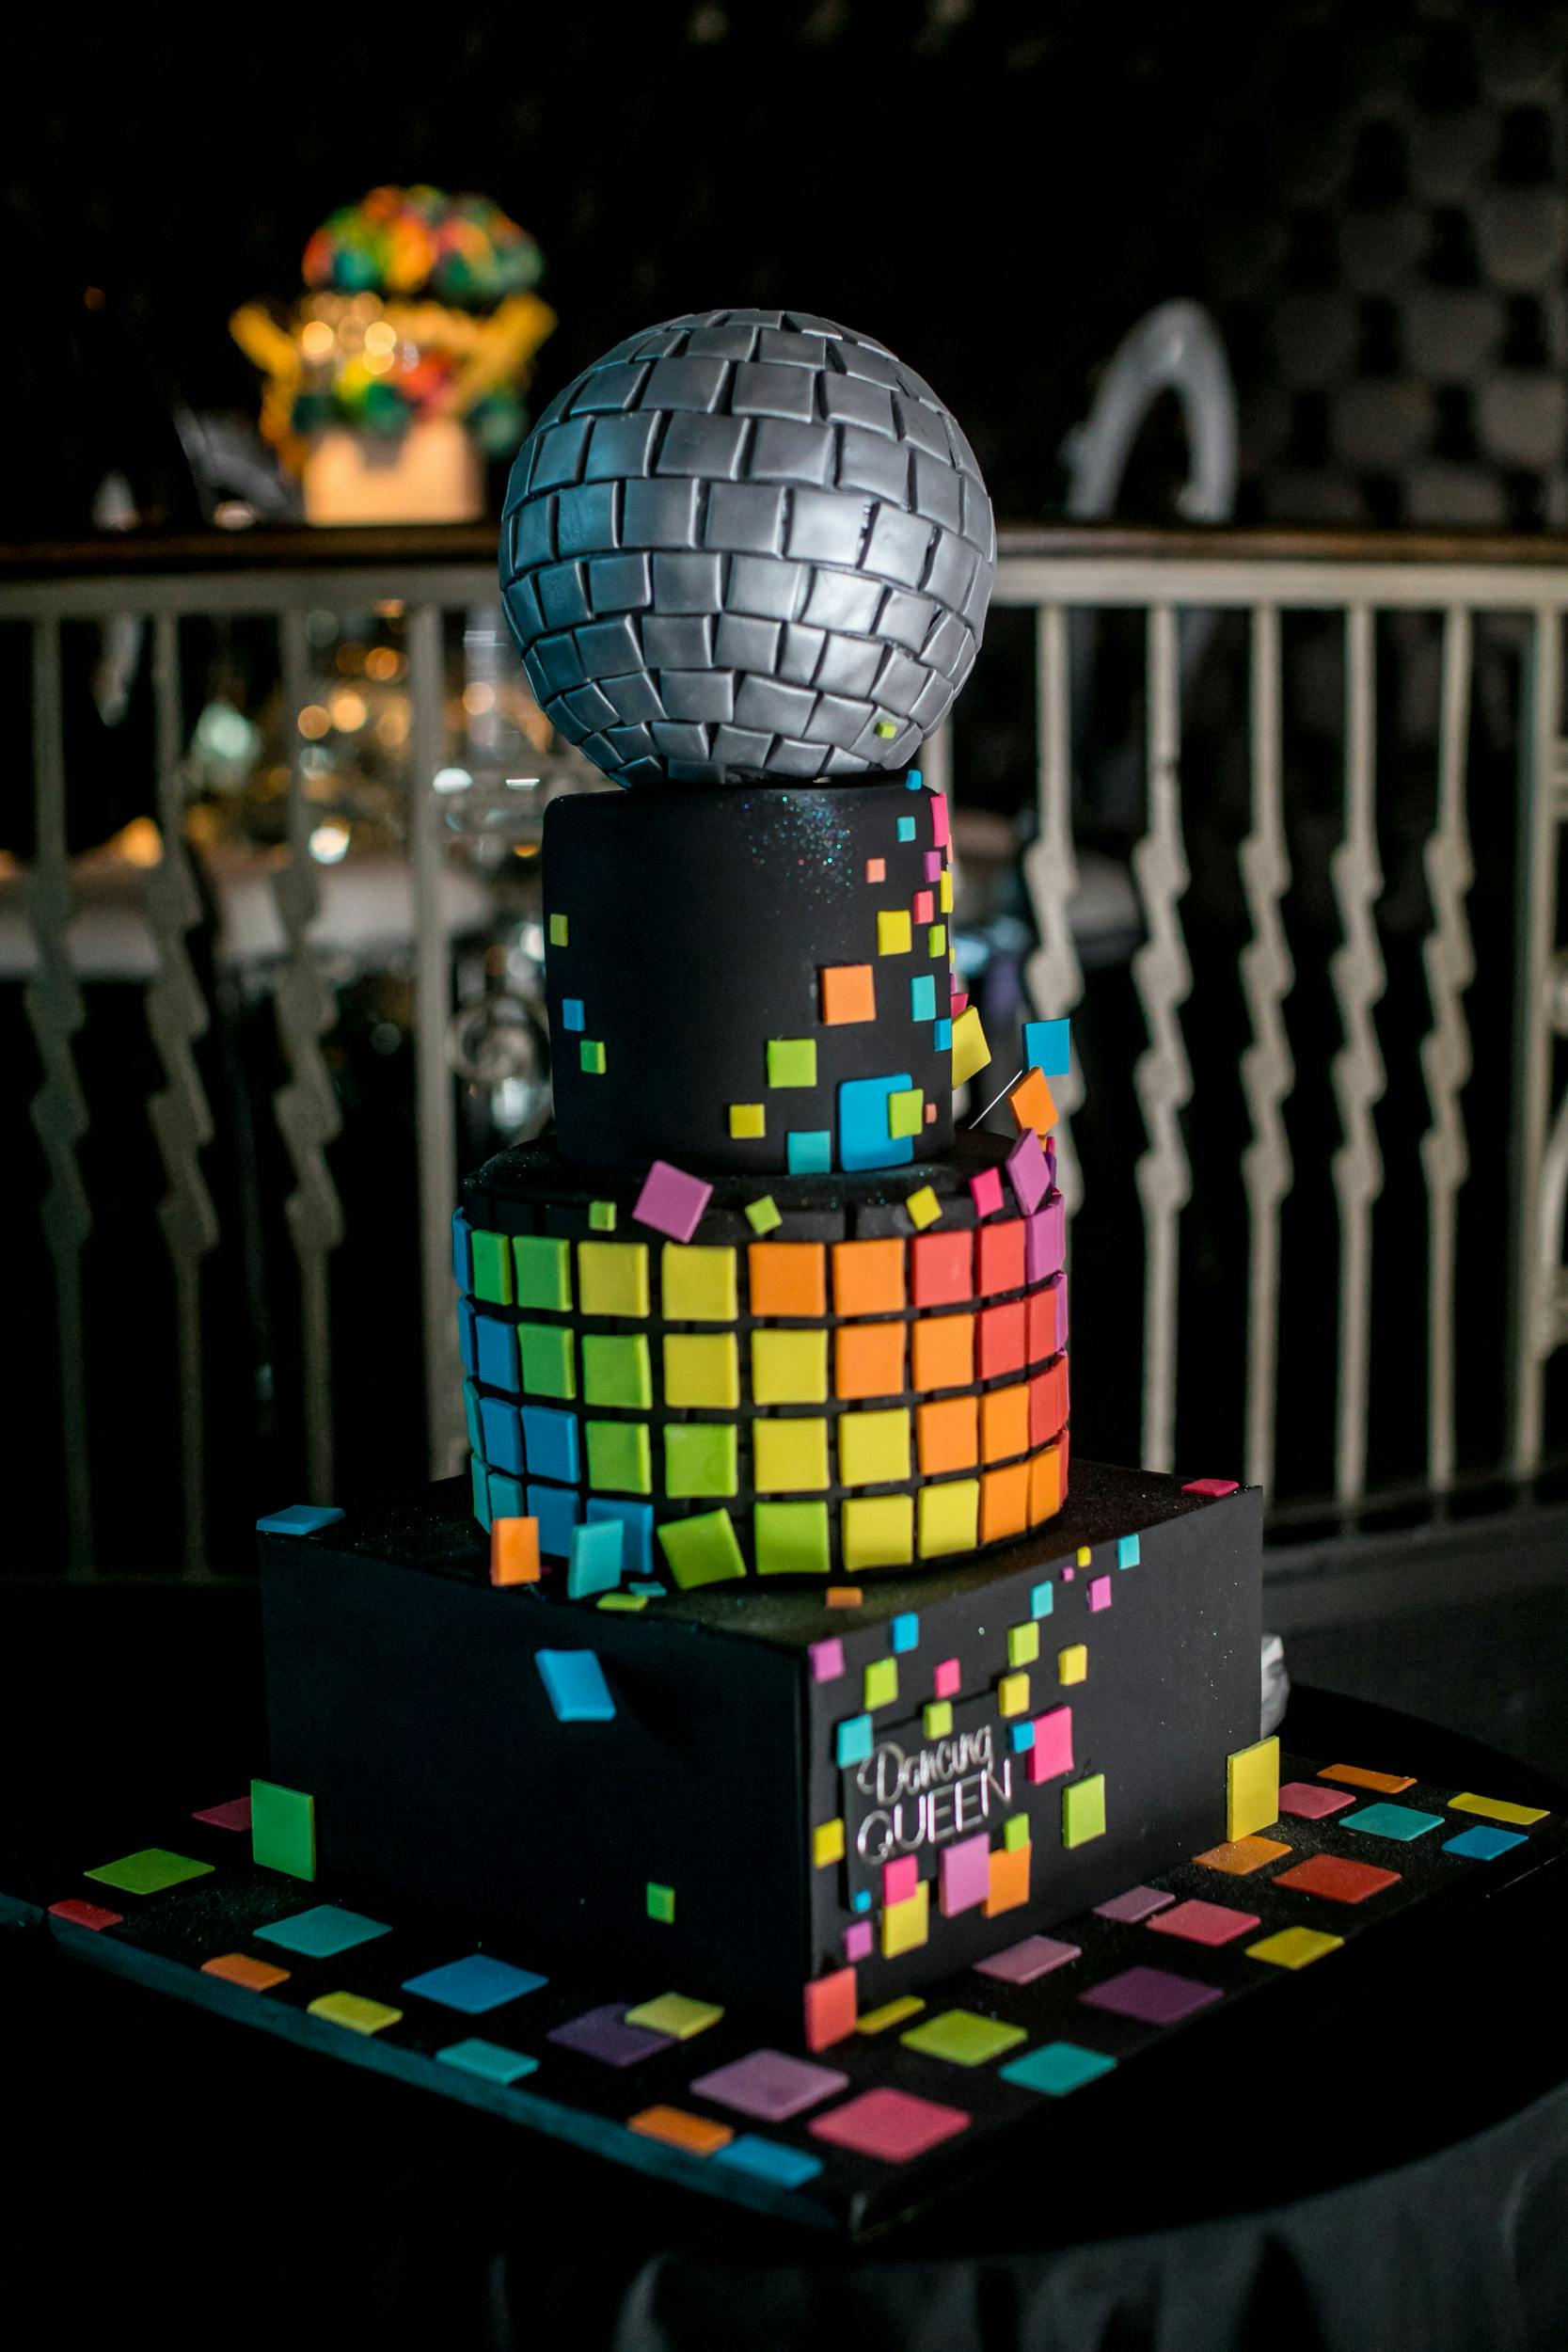 31 Disco Theme Party Ideas That Will Take You Back in Time